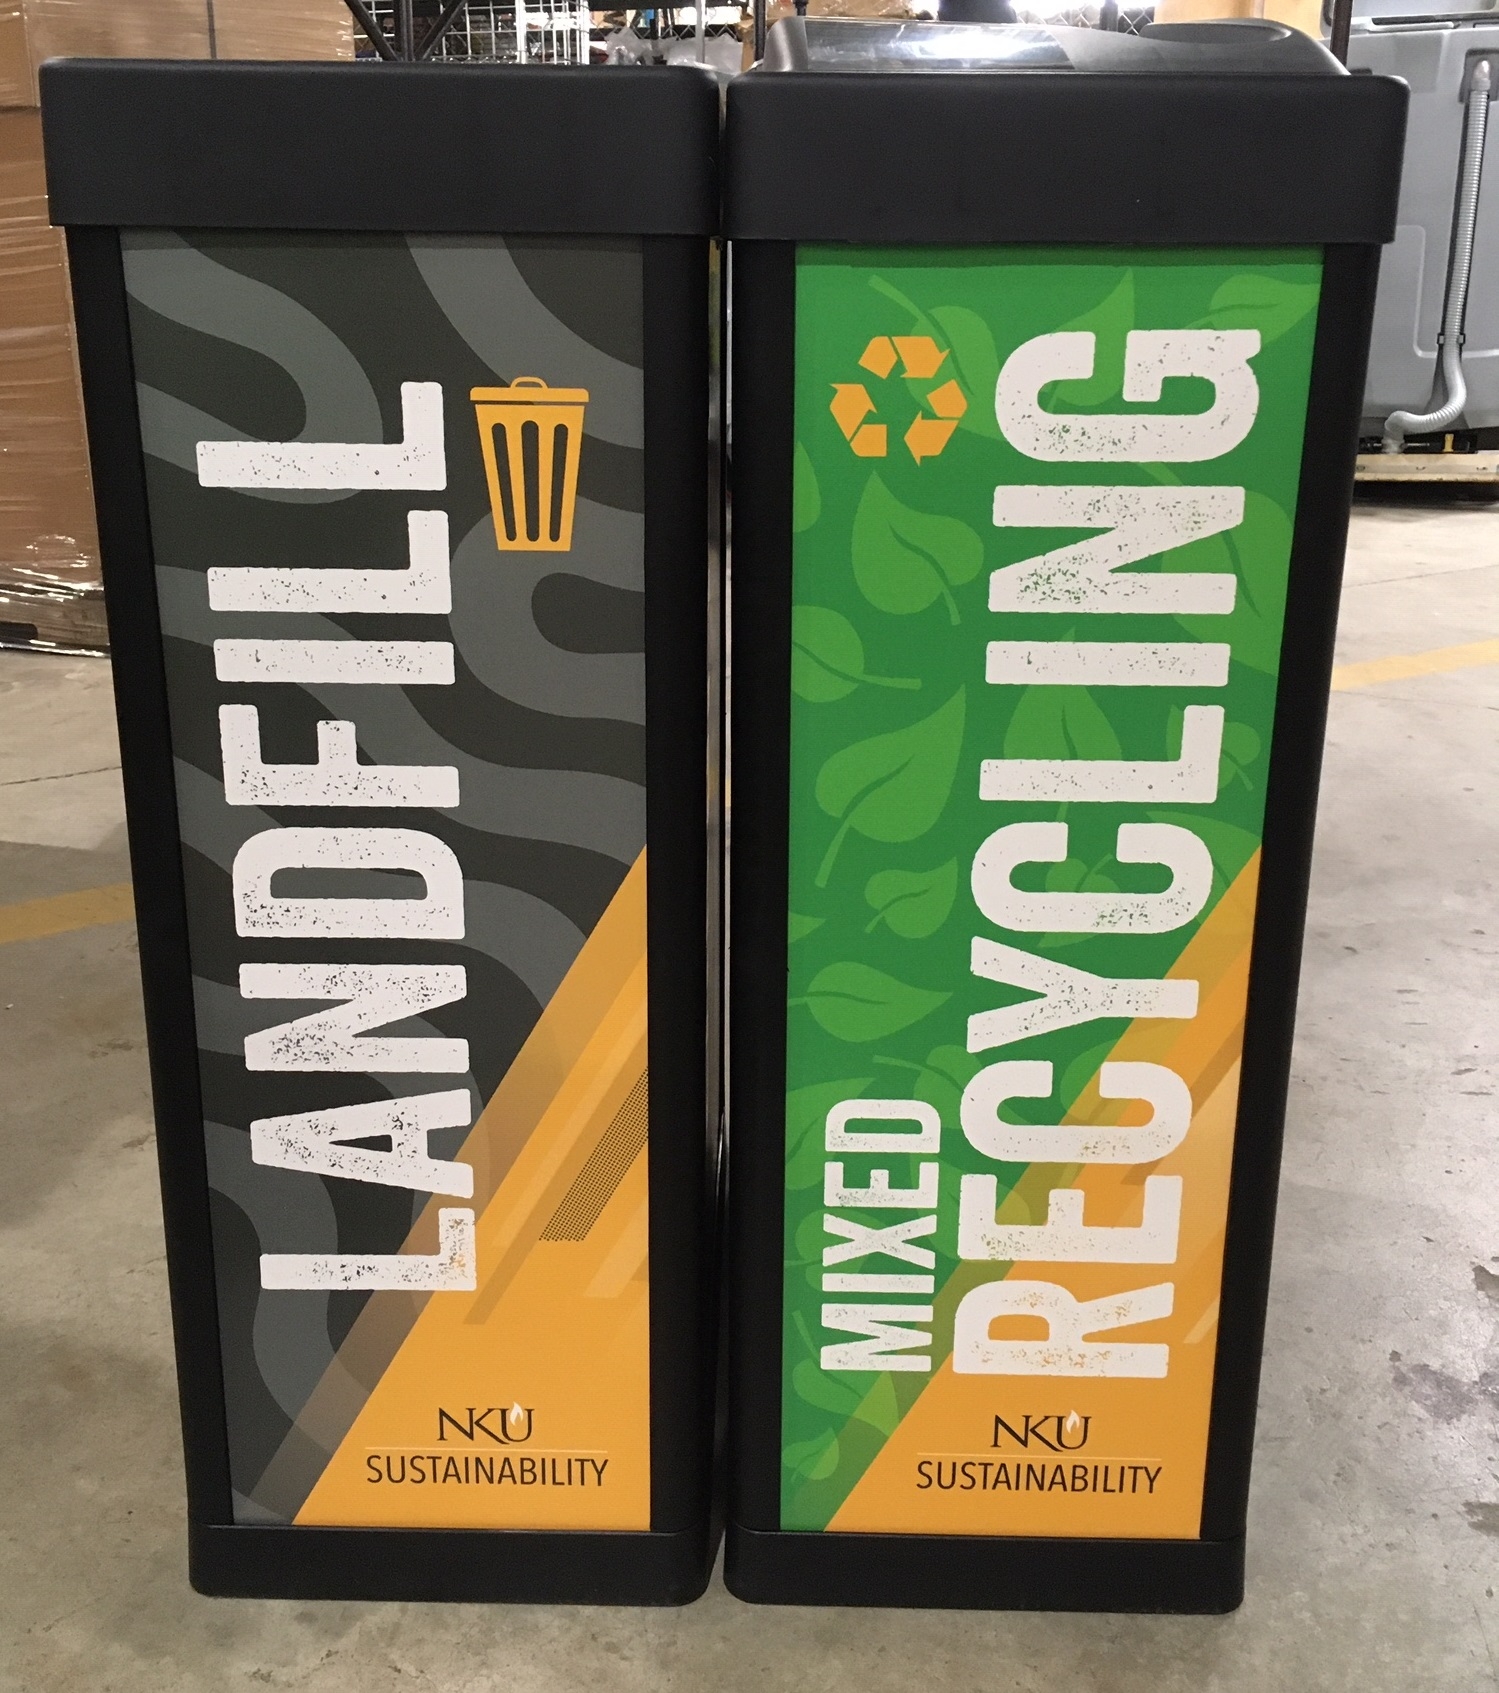 NKU's newly branded bins titled "mixed recycling" and "landfill"